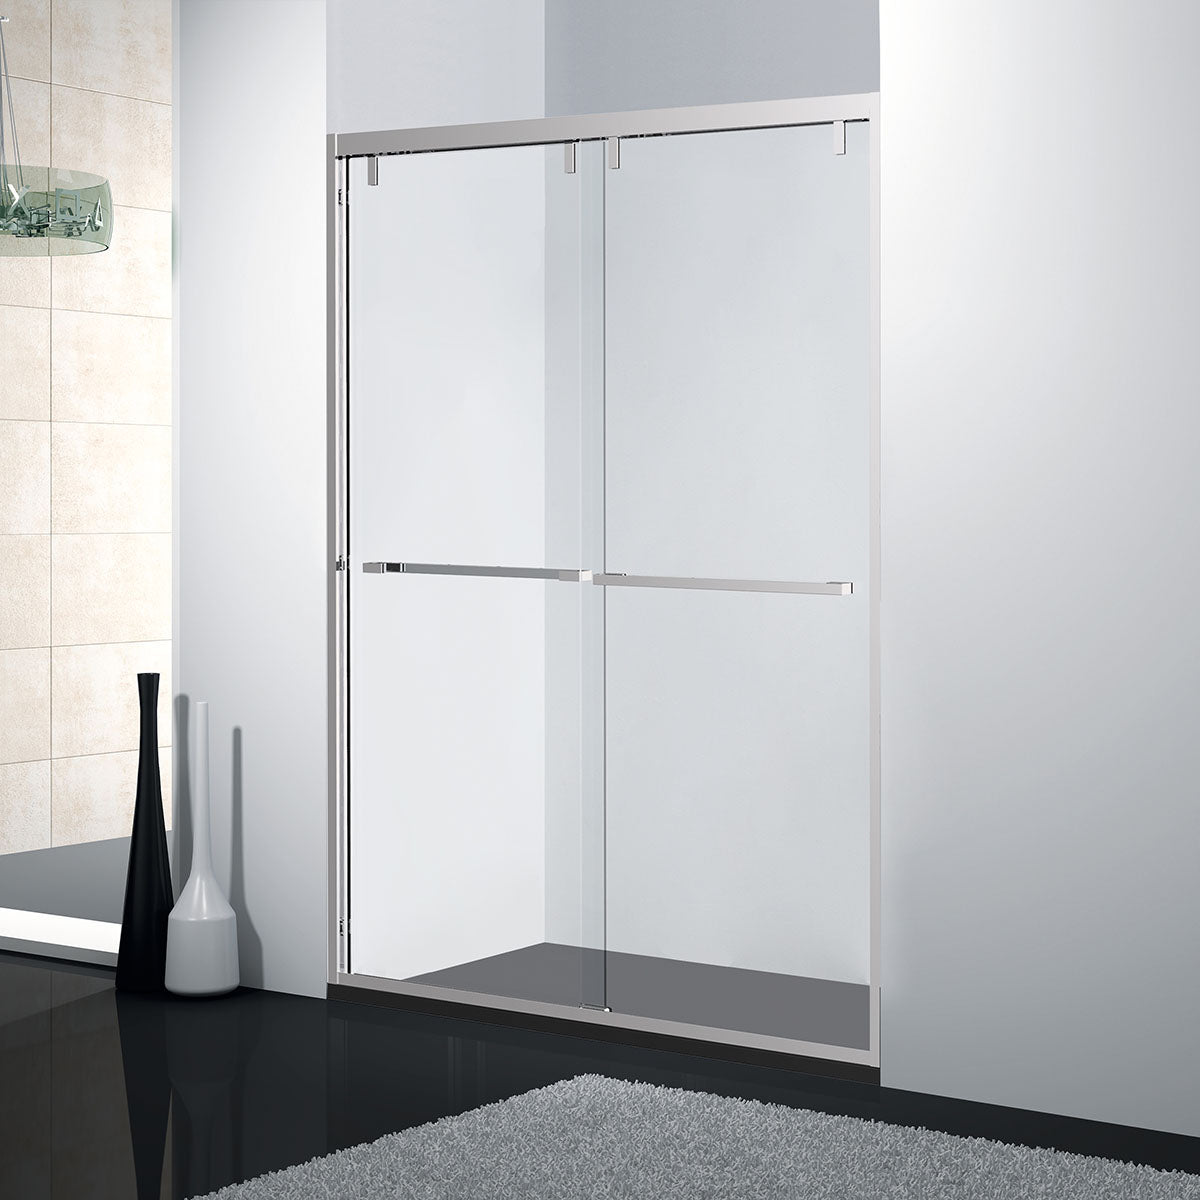 54" AC23 series Shower Door with Klearteck Treatment (3/8" Thickness) (Chrome)